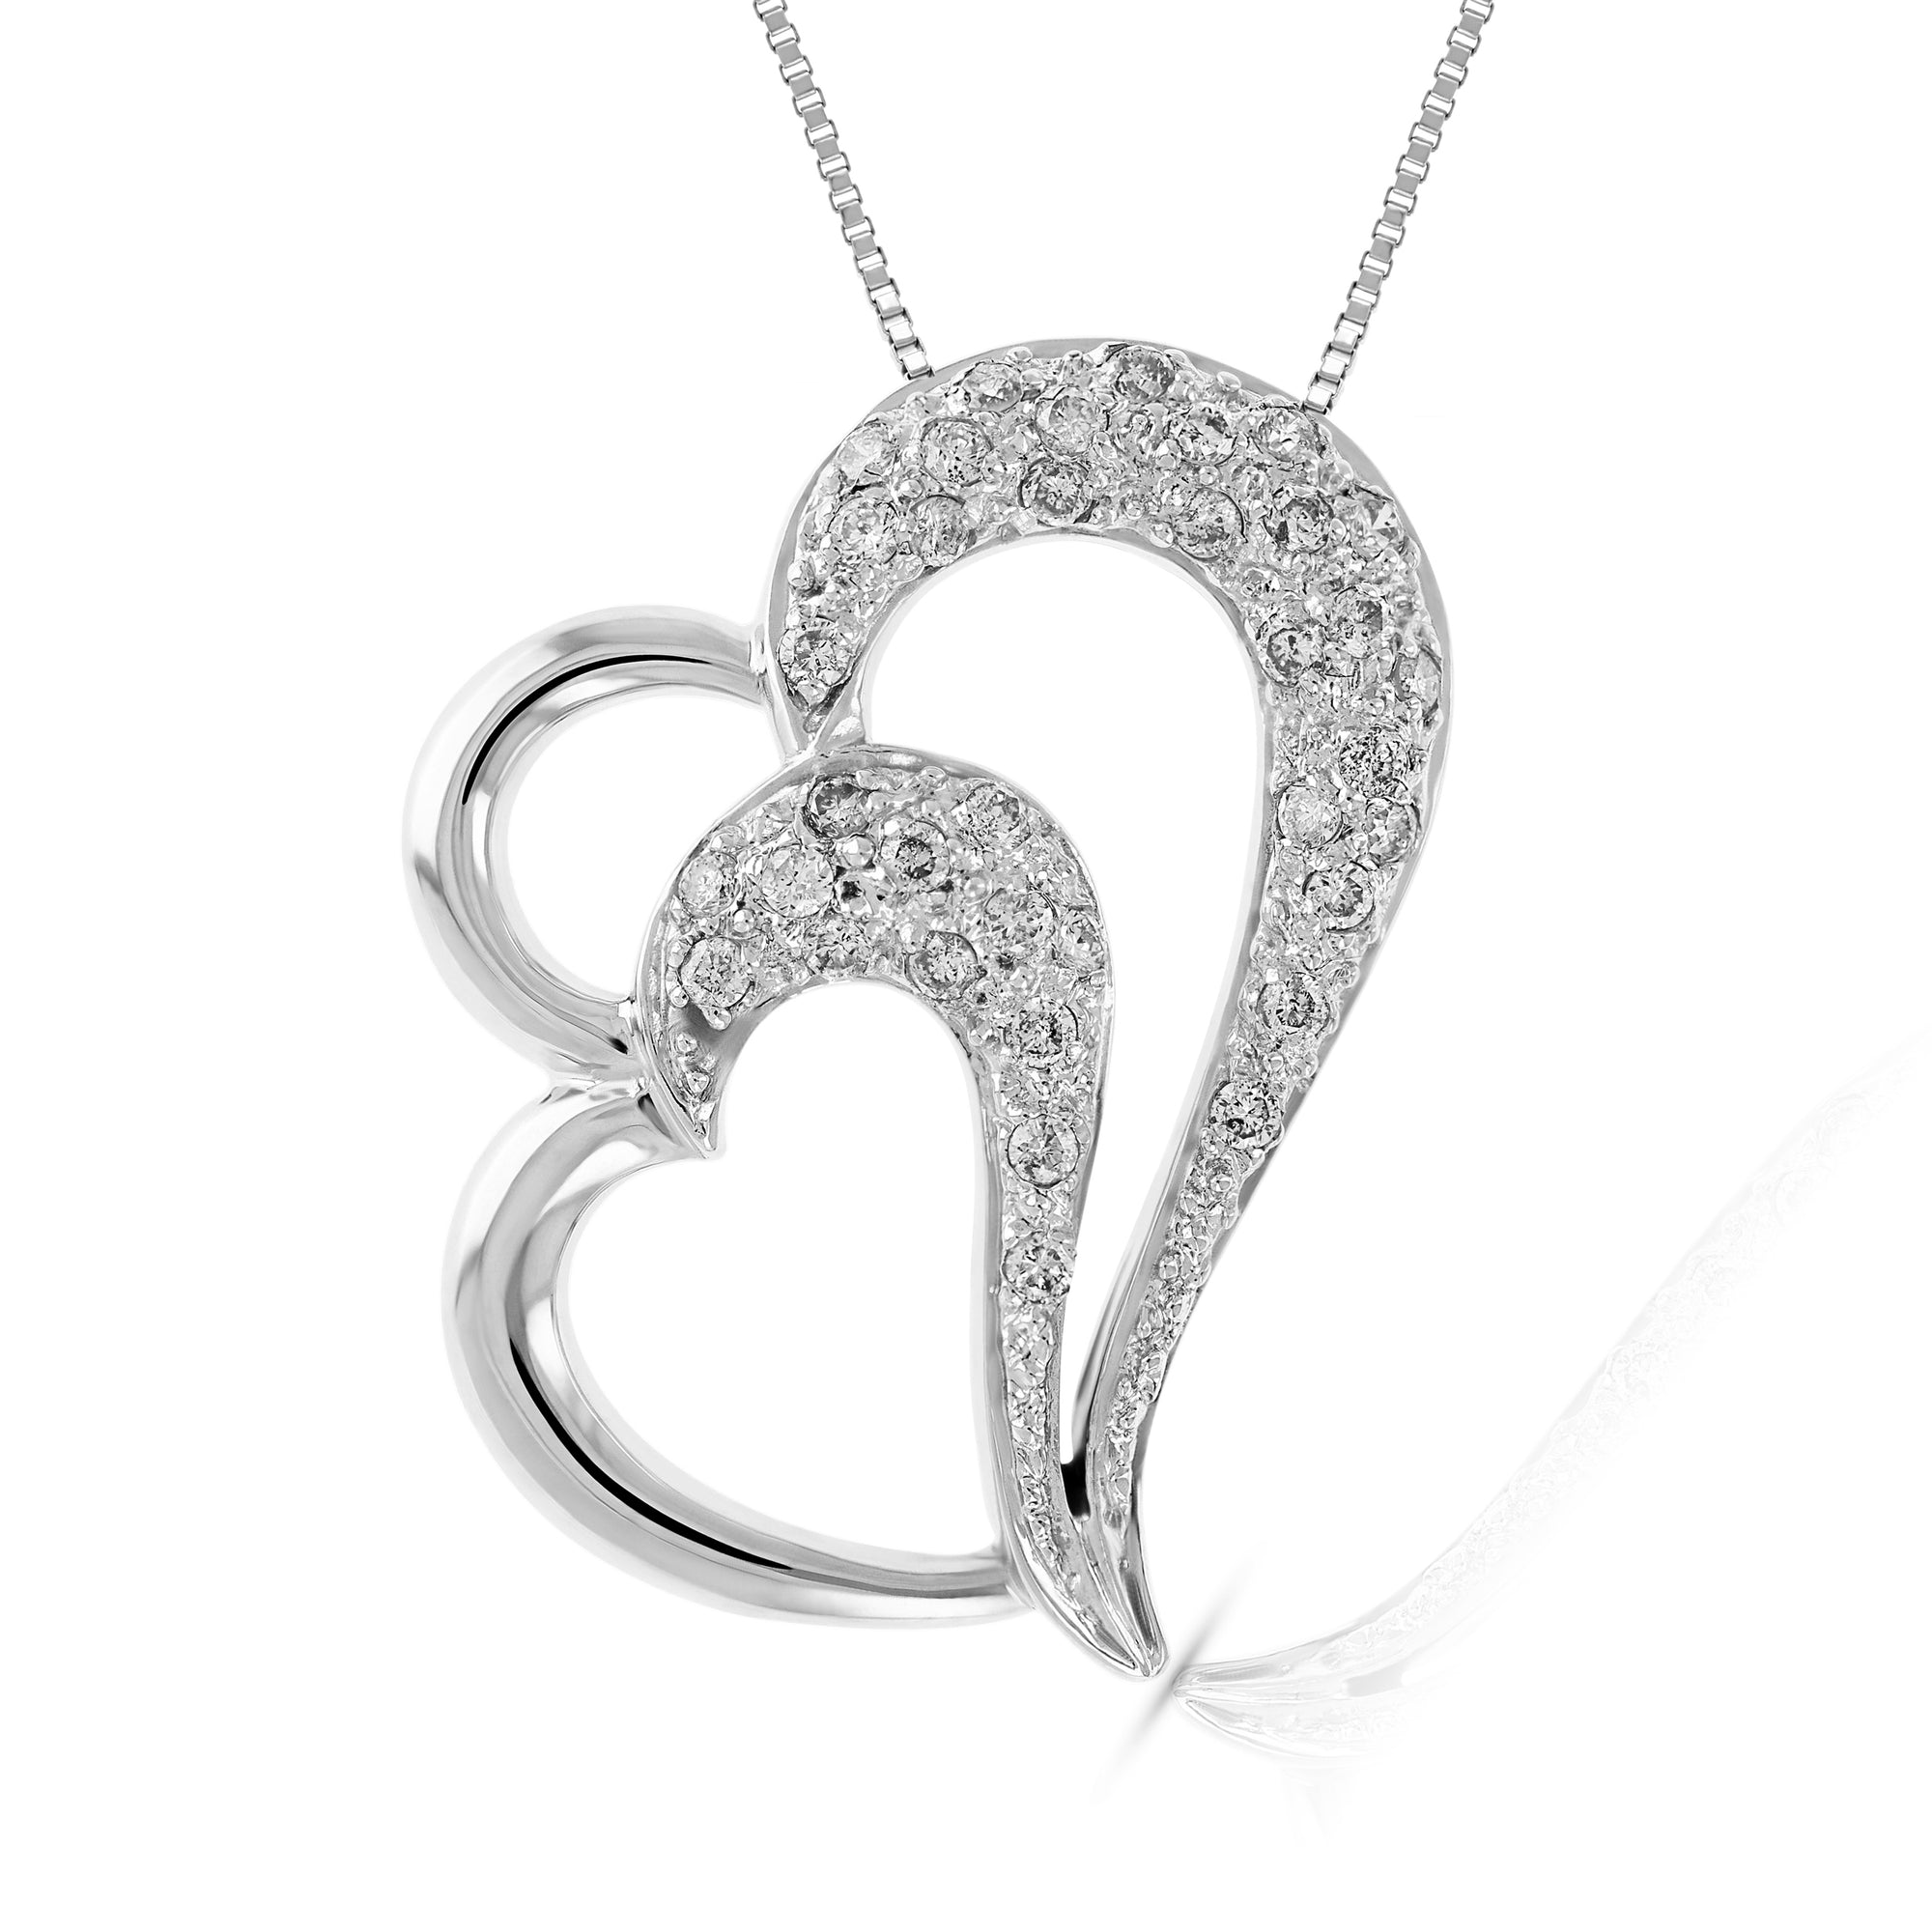 1/3 cttw Diamond Double Heart Pendant Necklace 14K White Gold with 18 Inch Chain